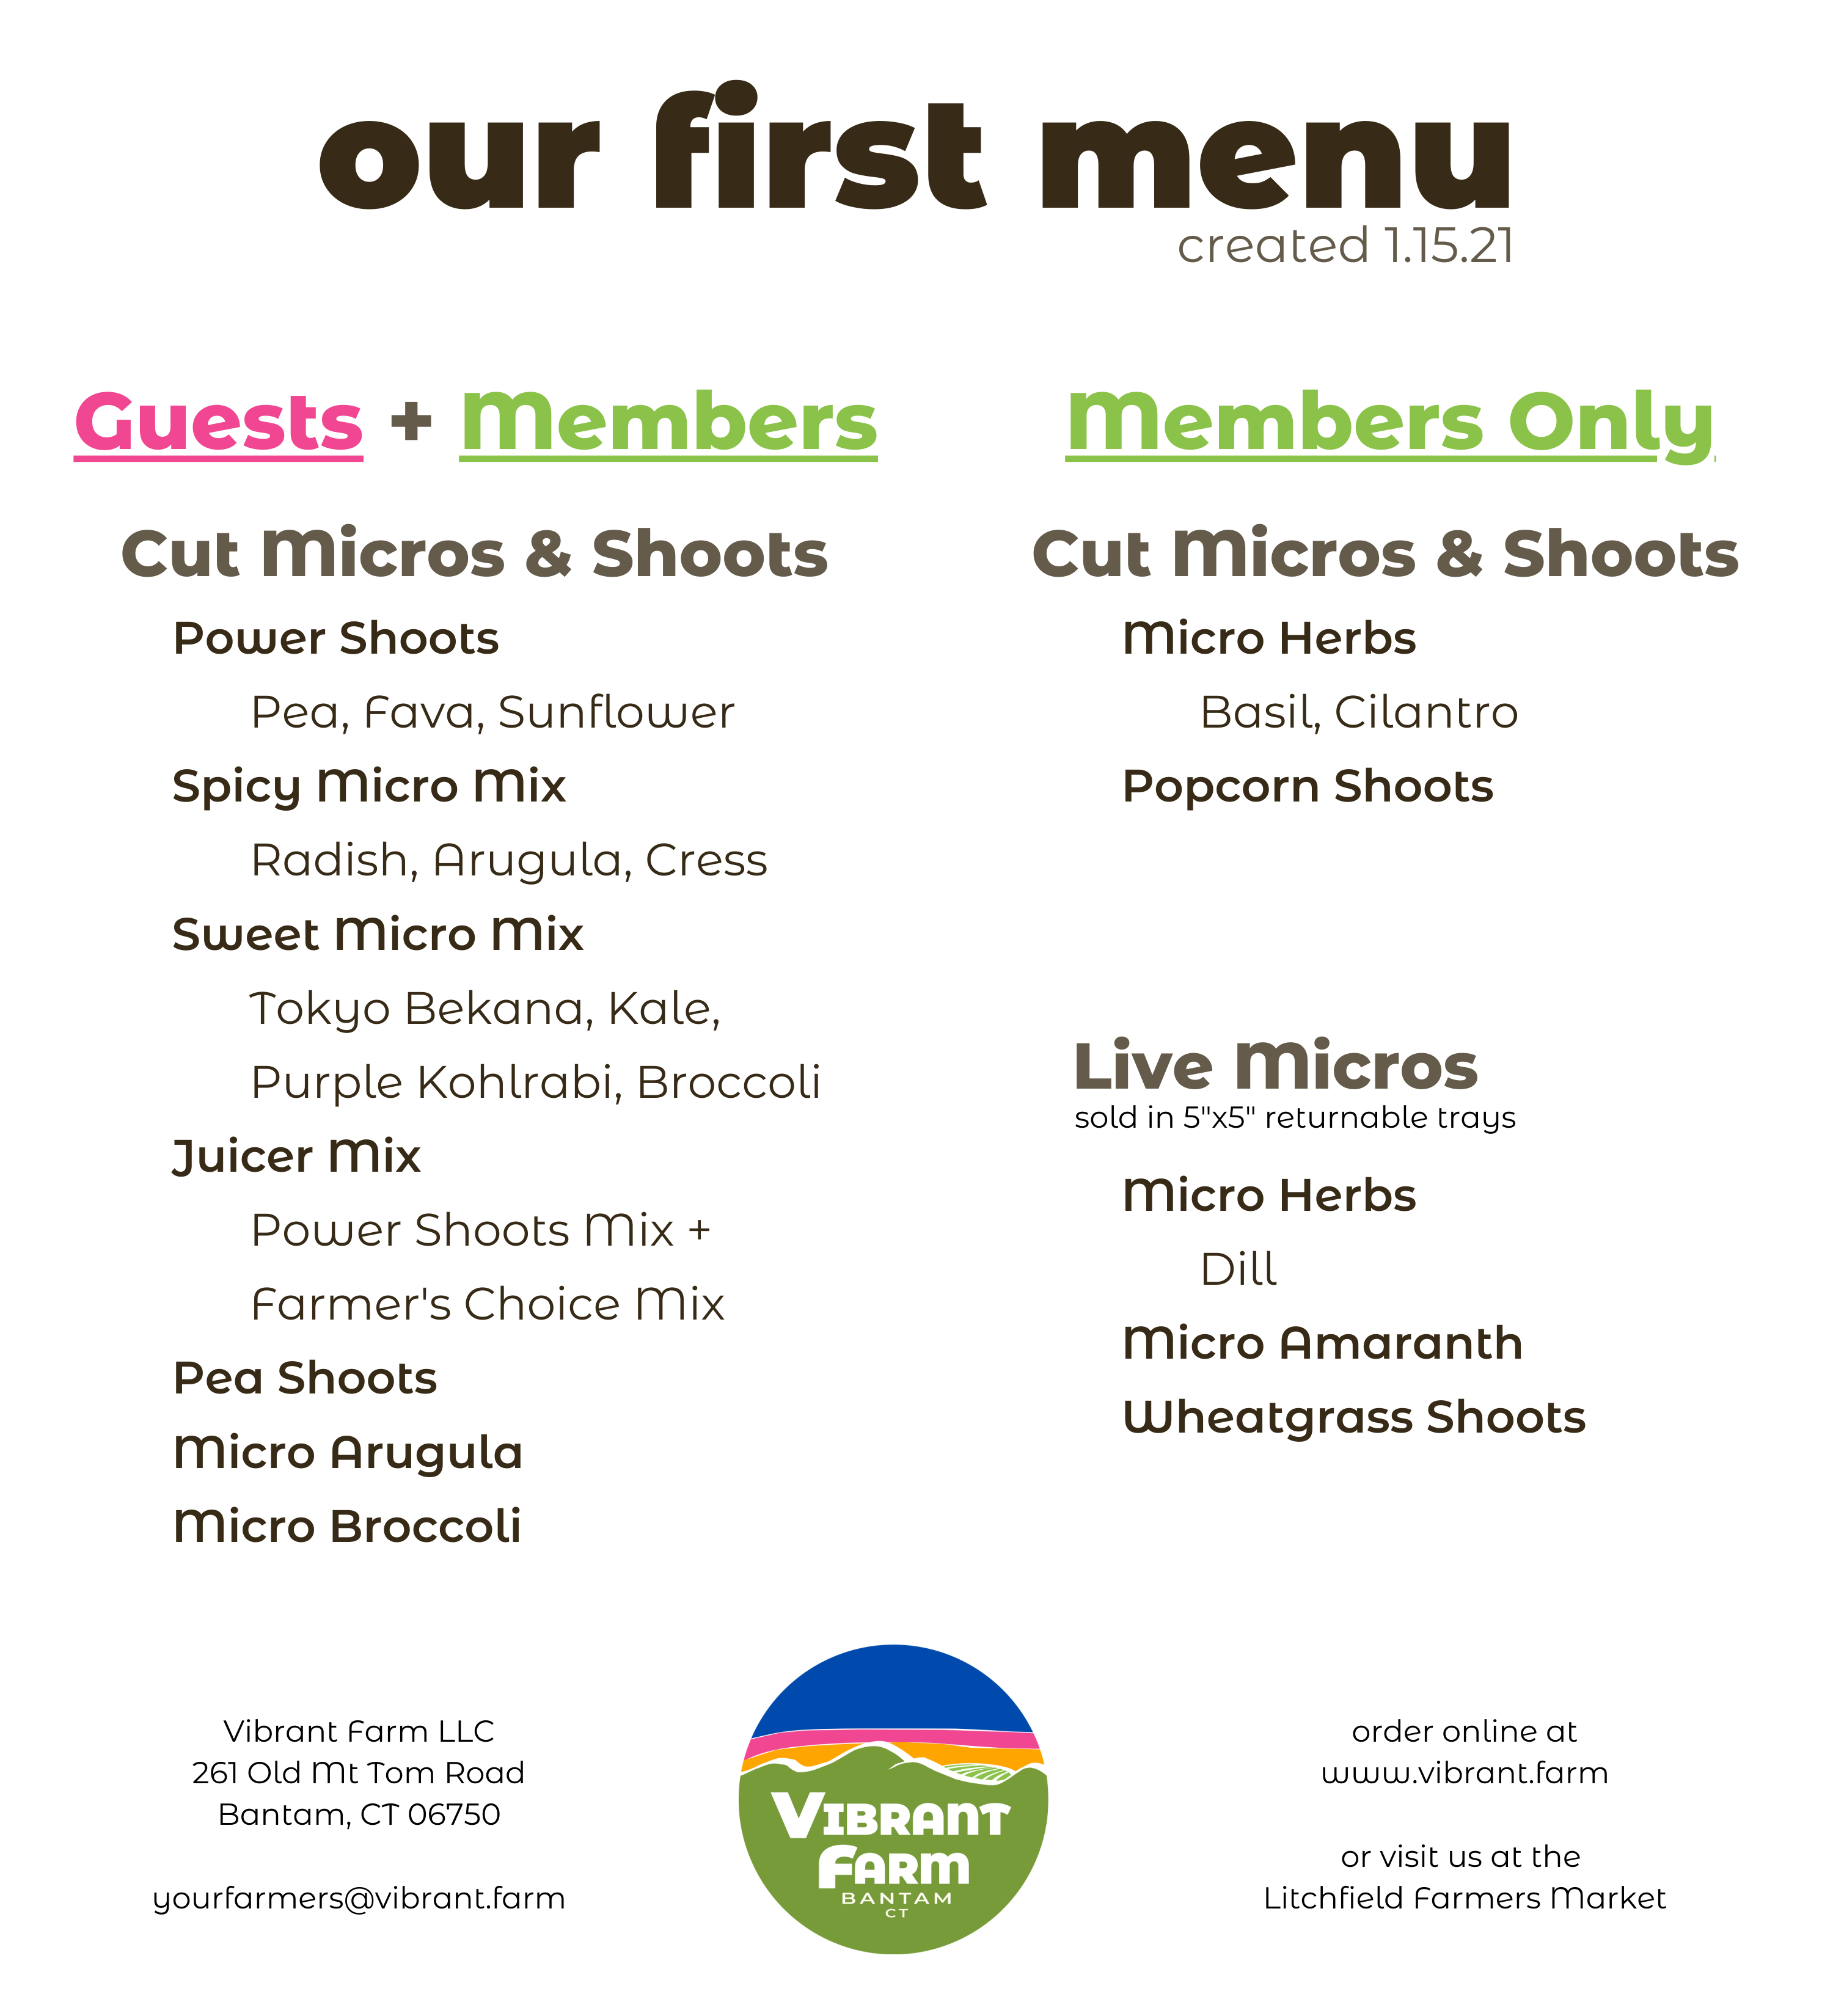 Our First Menu. Created 1.15.21